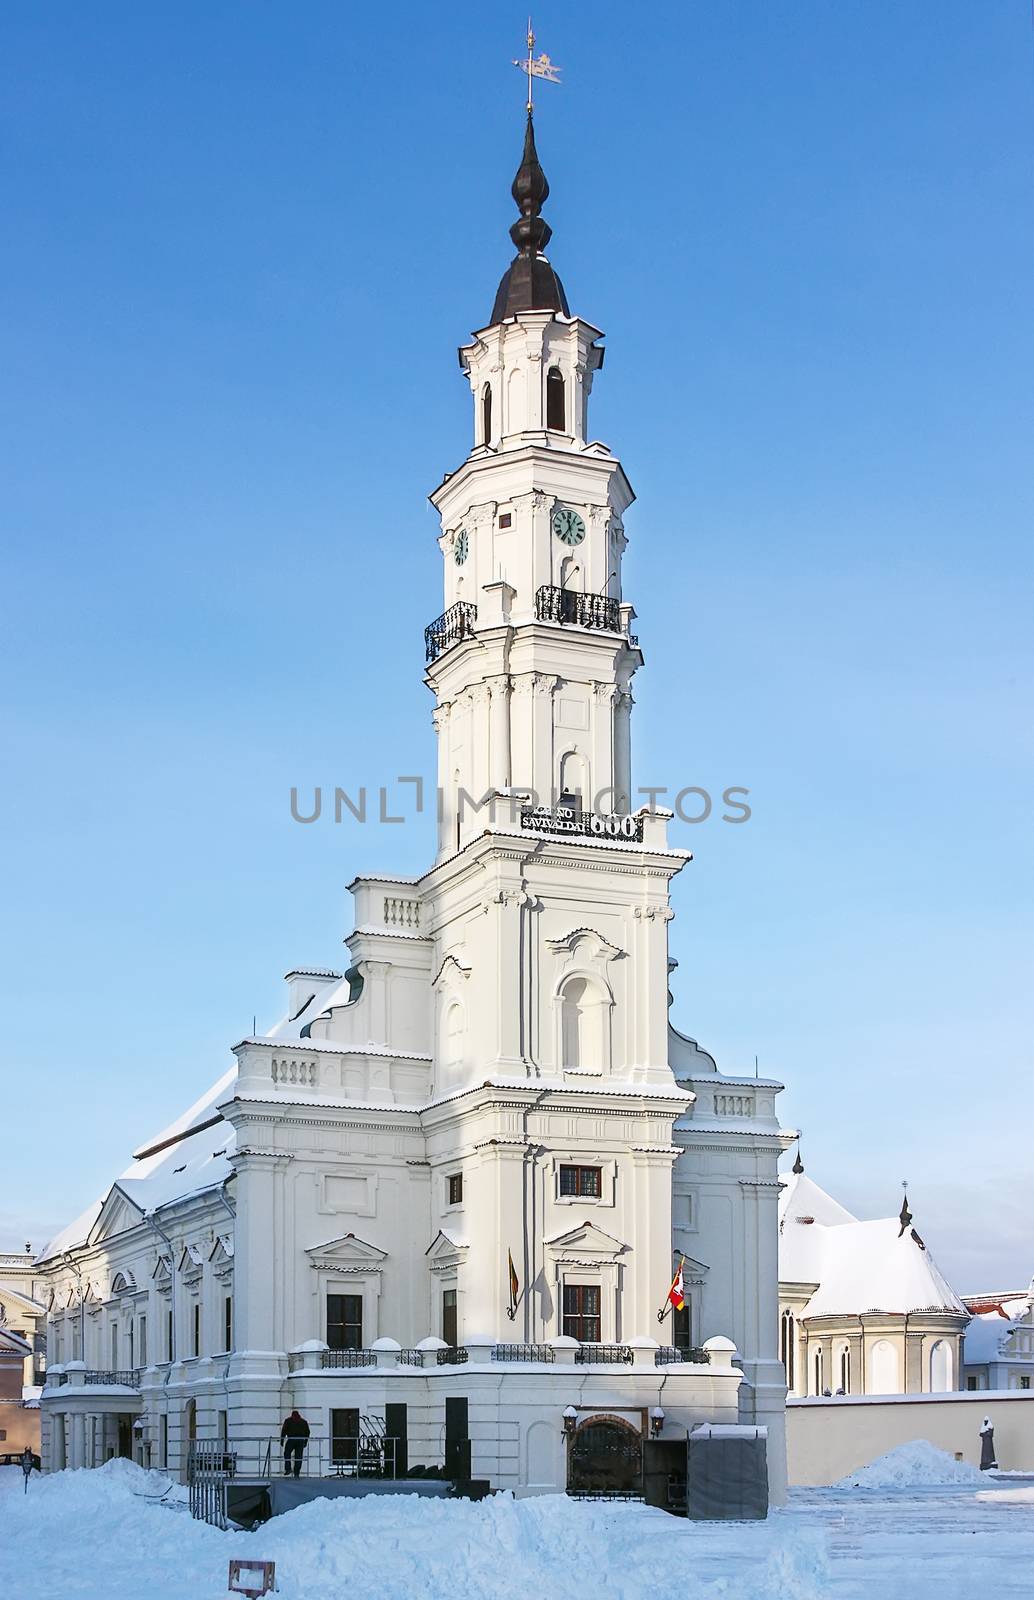 The Town Hall of Kaunas stands in the middle of the Town Hall Square at the heart of the Old Town, Kaunas, Lithuania.